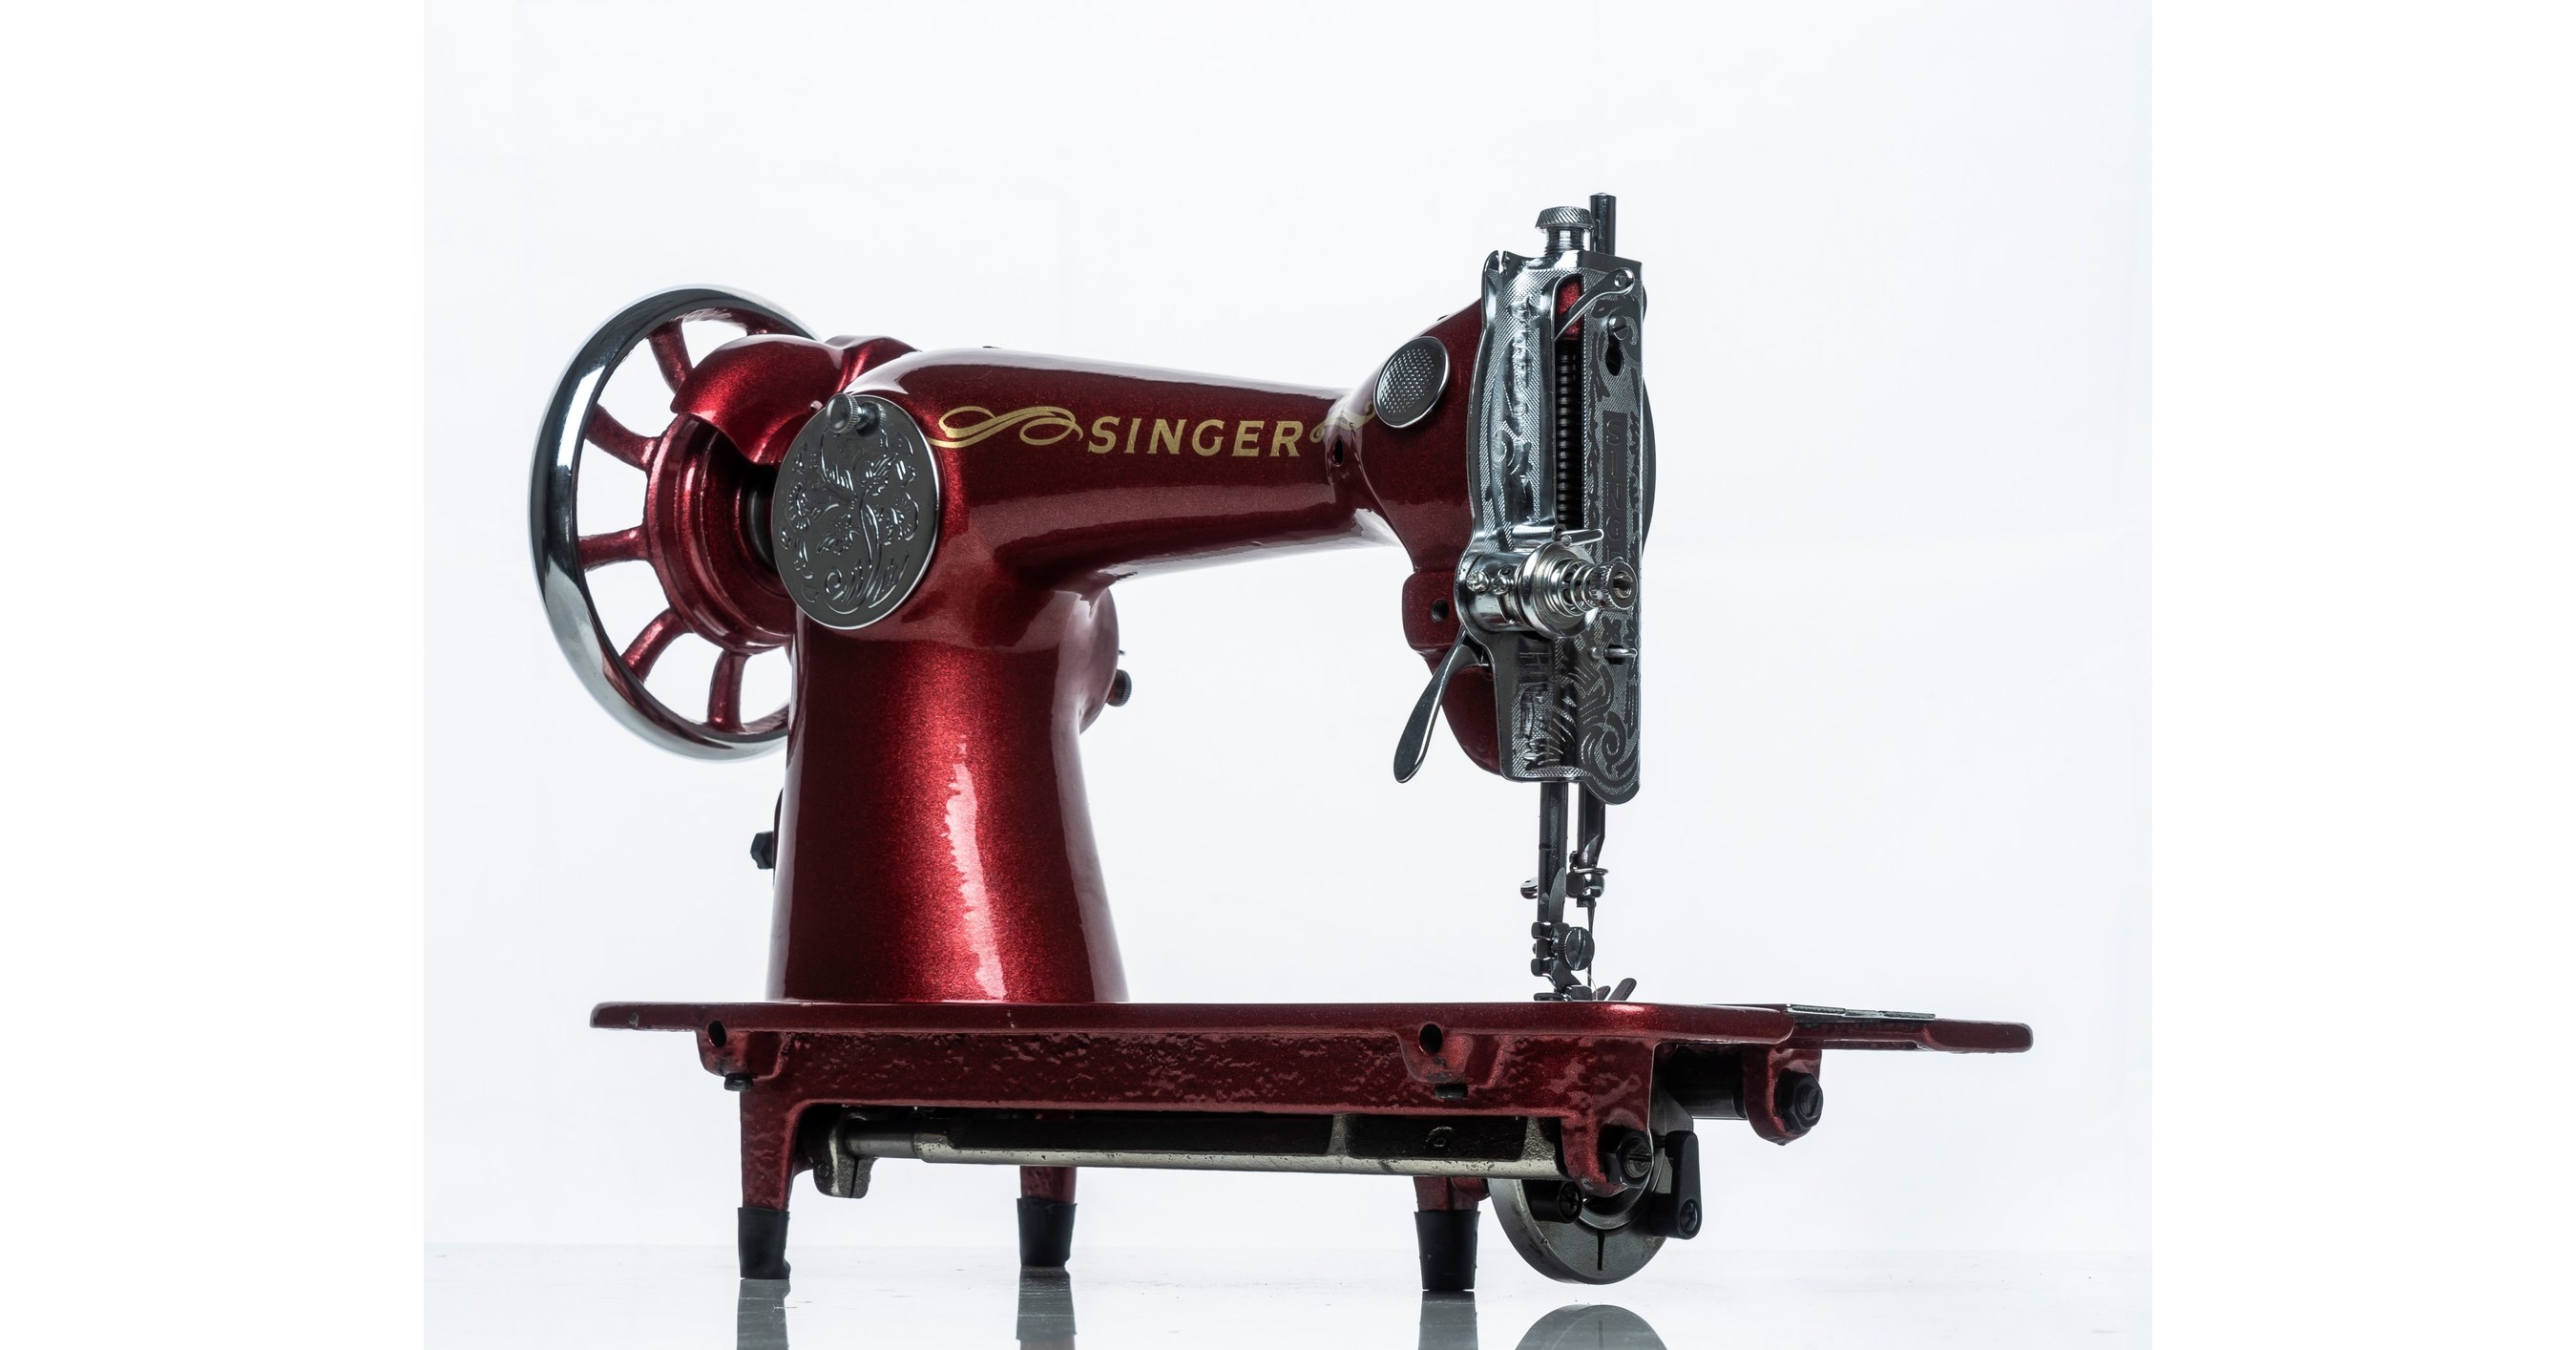 1851 - Isaac Singer's Sewing Machine Patent Model